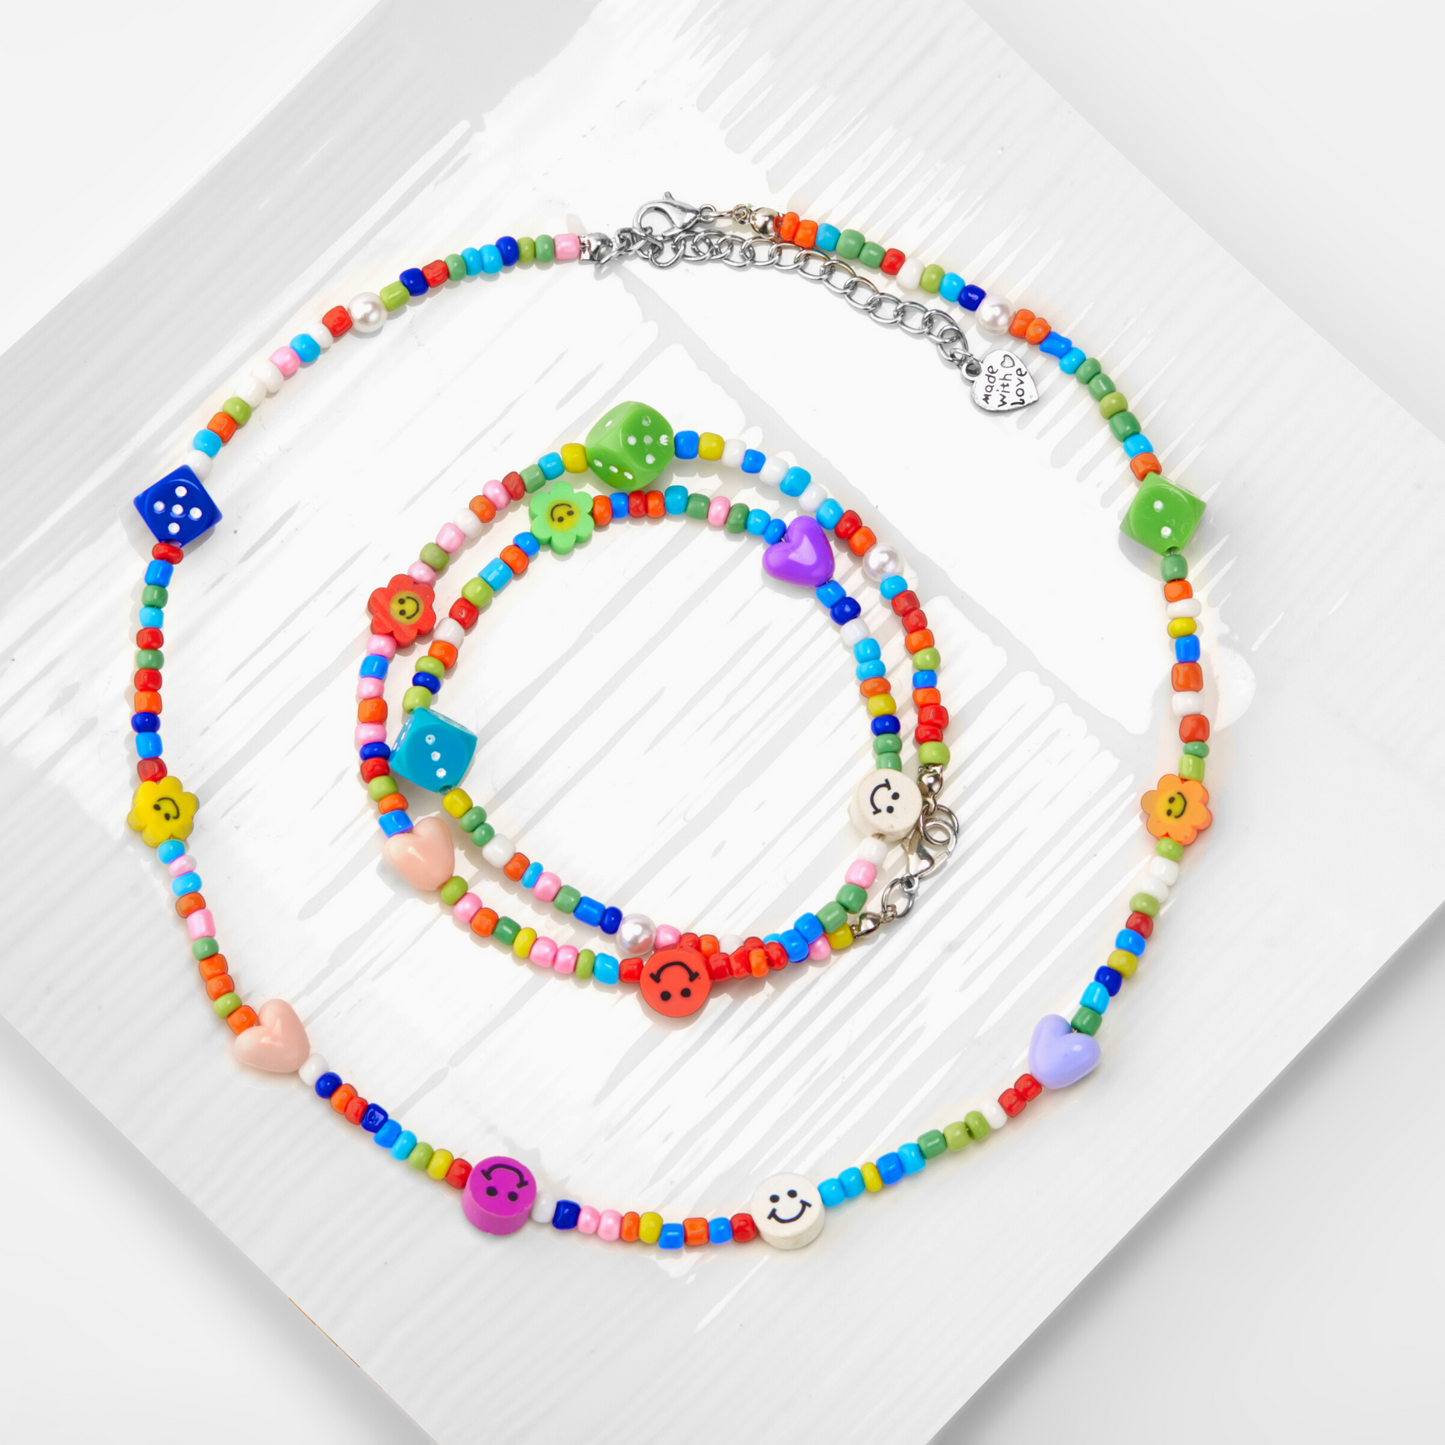 Beaded-smiley-face-necklace